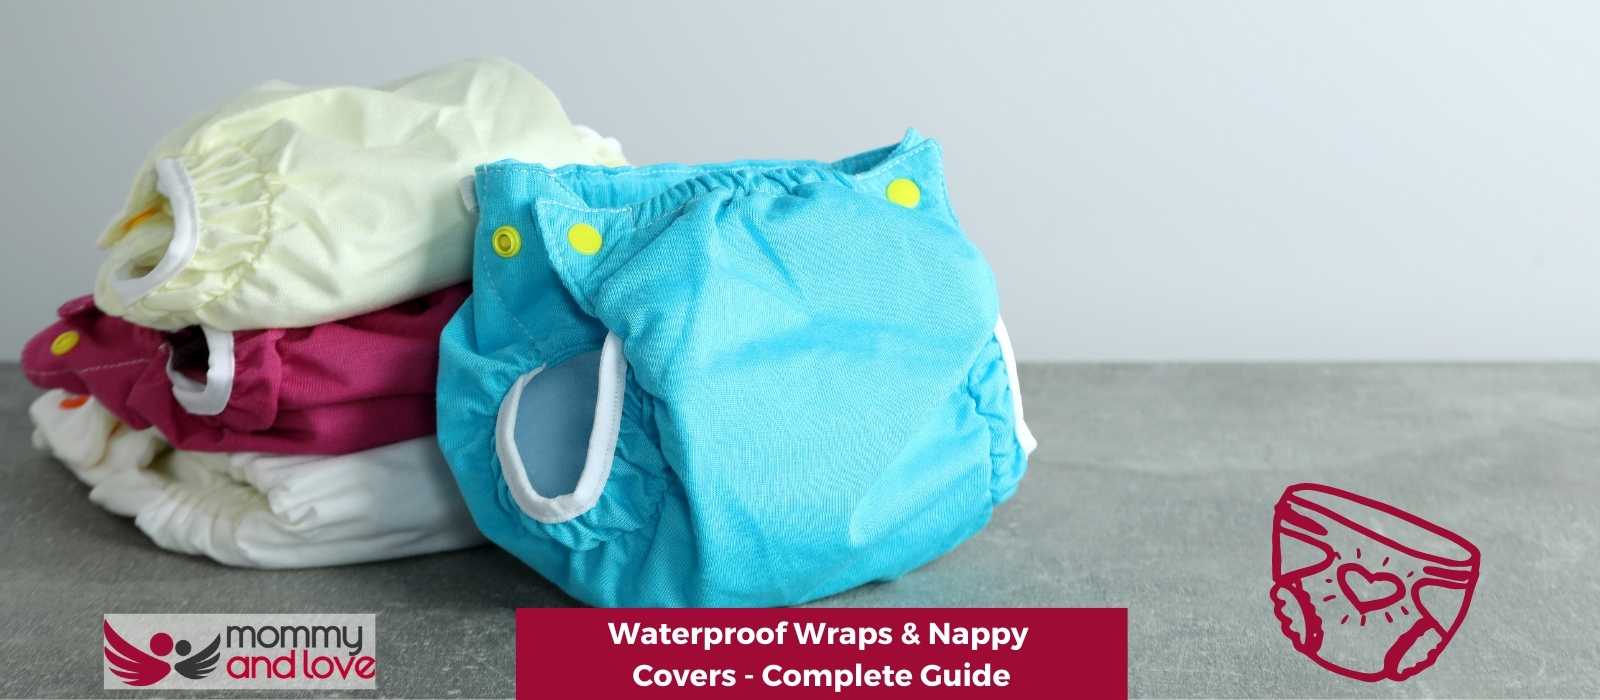 Waterproof Wraps & Nappy Covers - Complete Guide